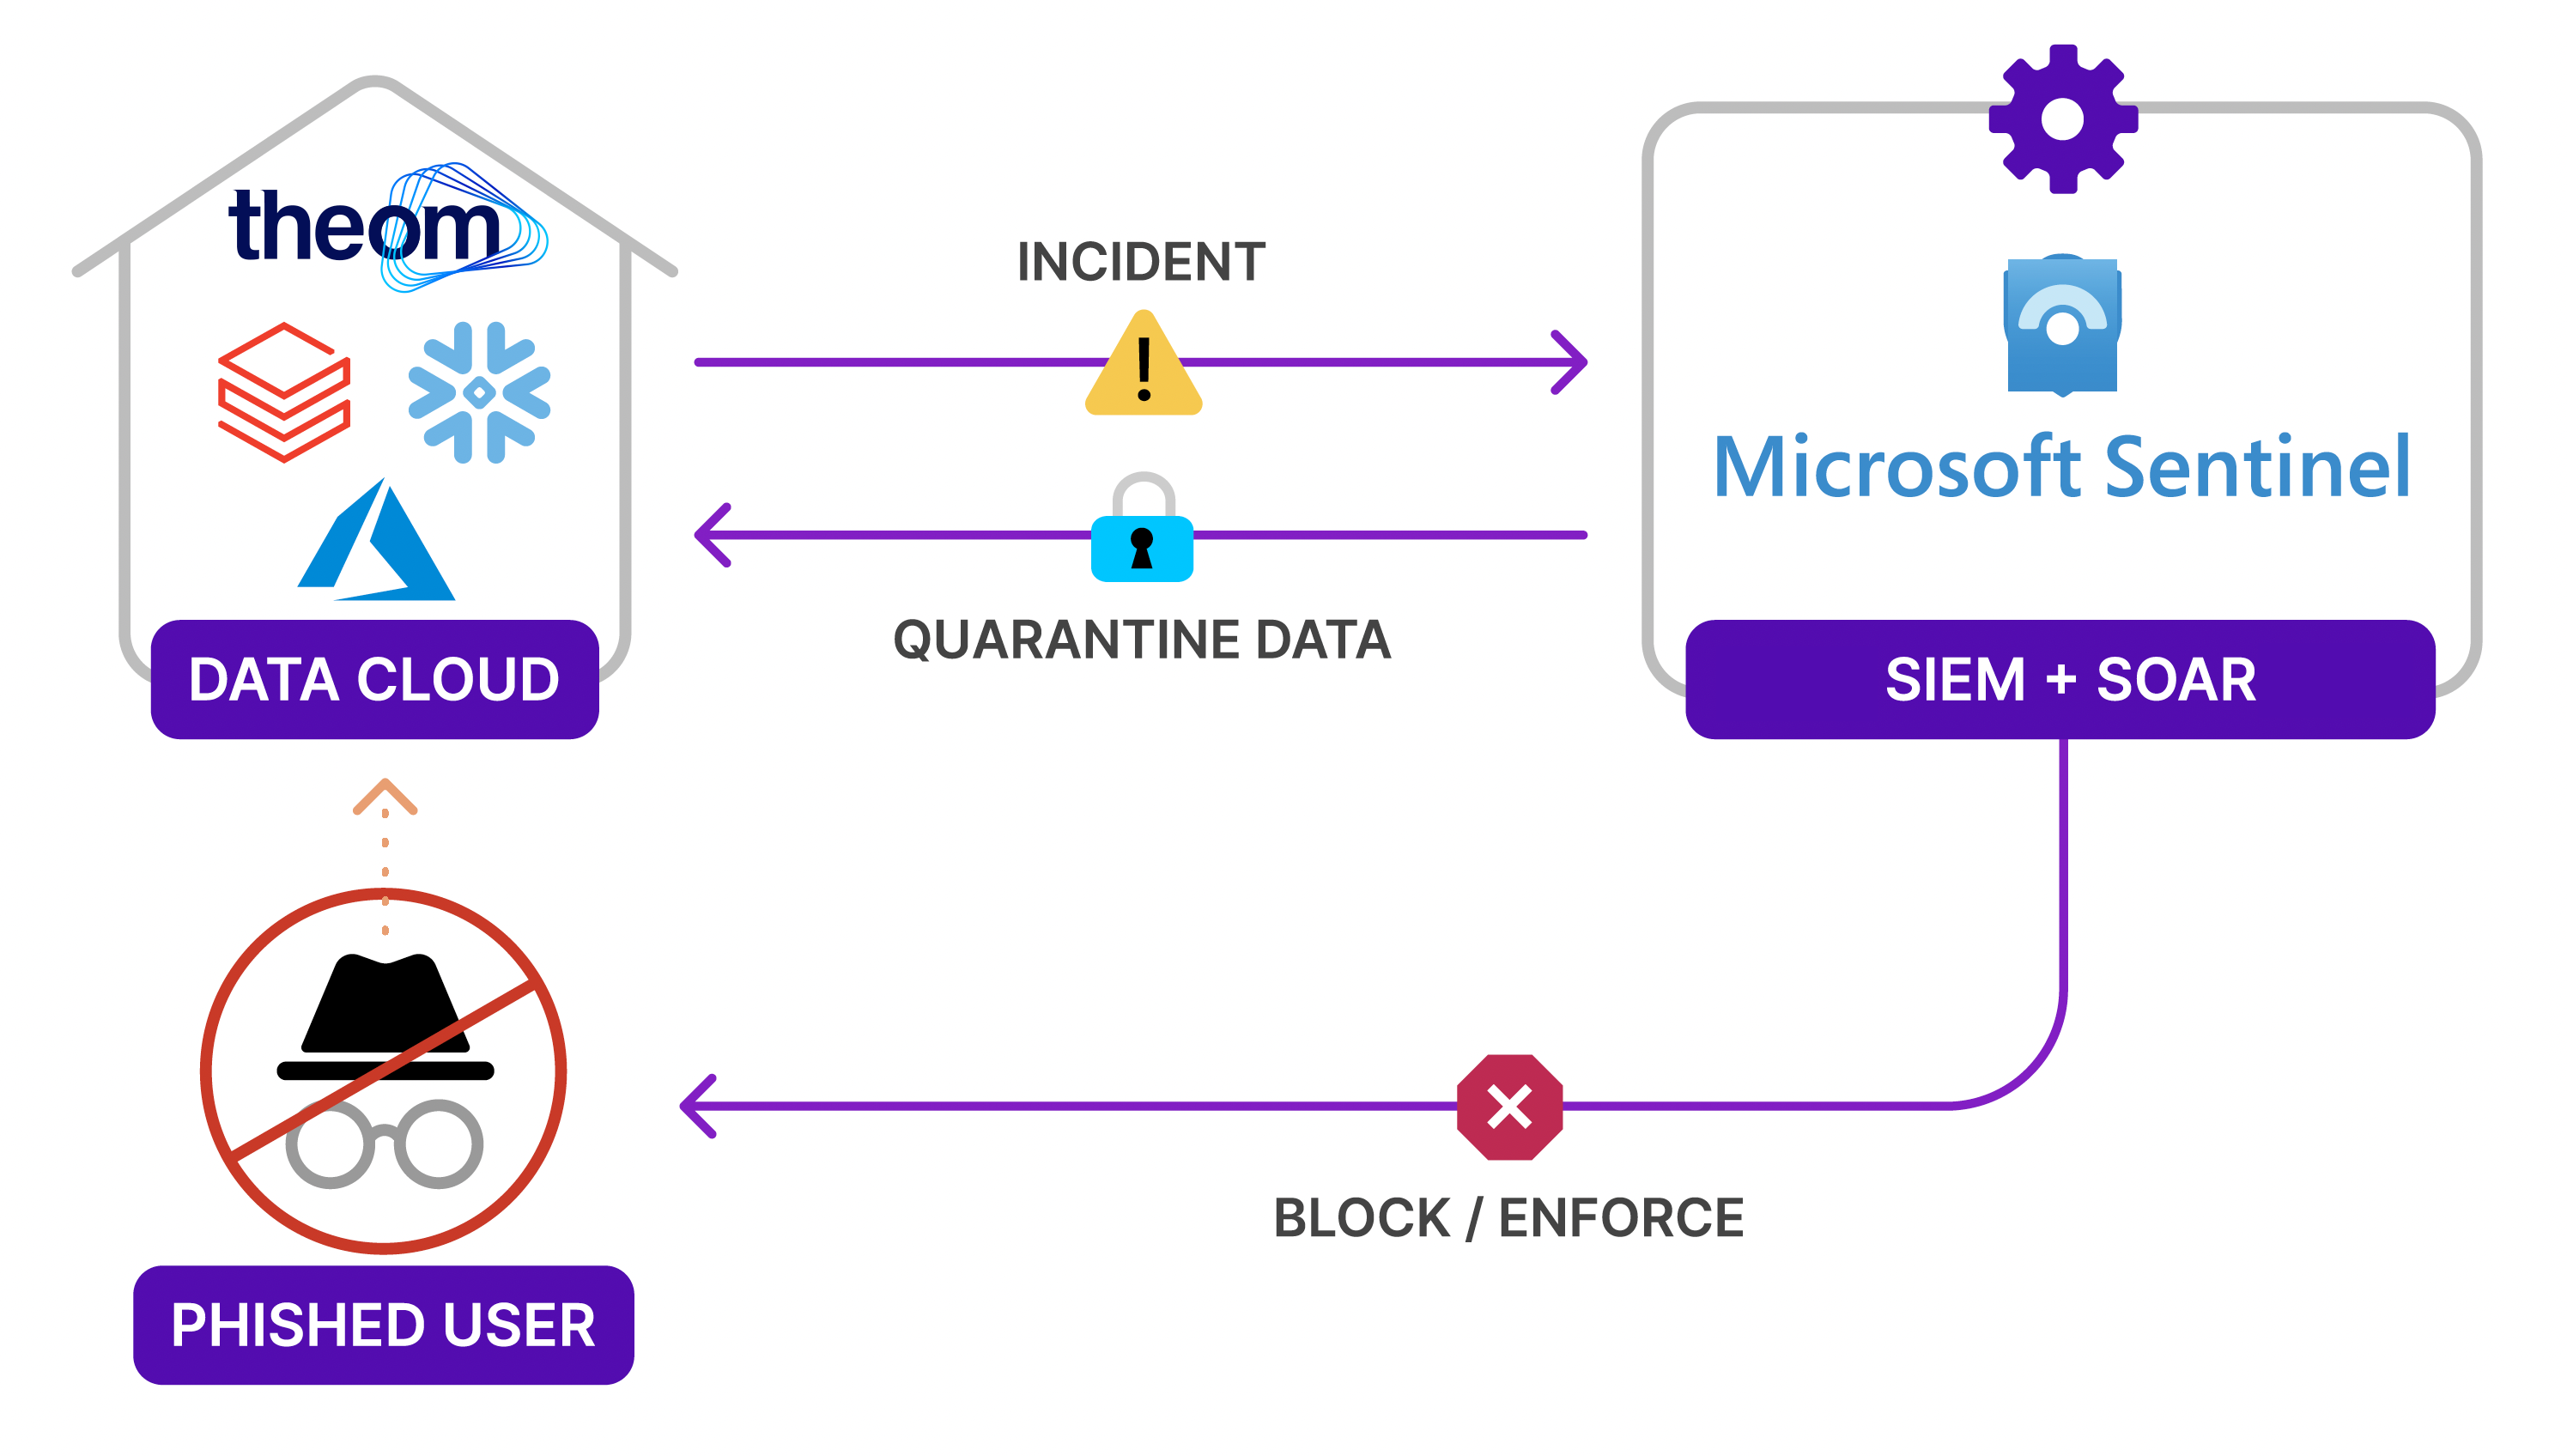 Theom integrates with Microsoft Sentinel, allowing Sentinel customers to seamlessly apply Theom’s unique AI threat intelligence while using their trusted environment for alerting and remediation.